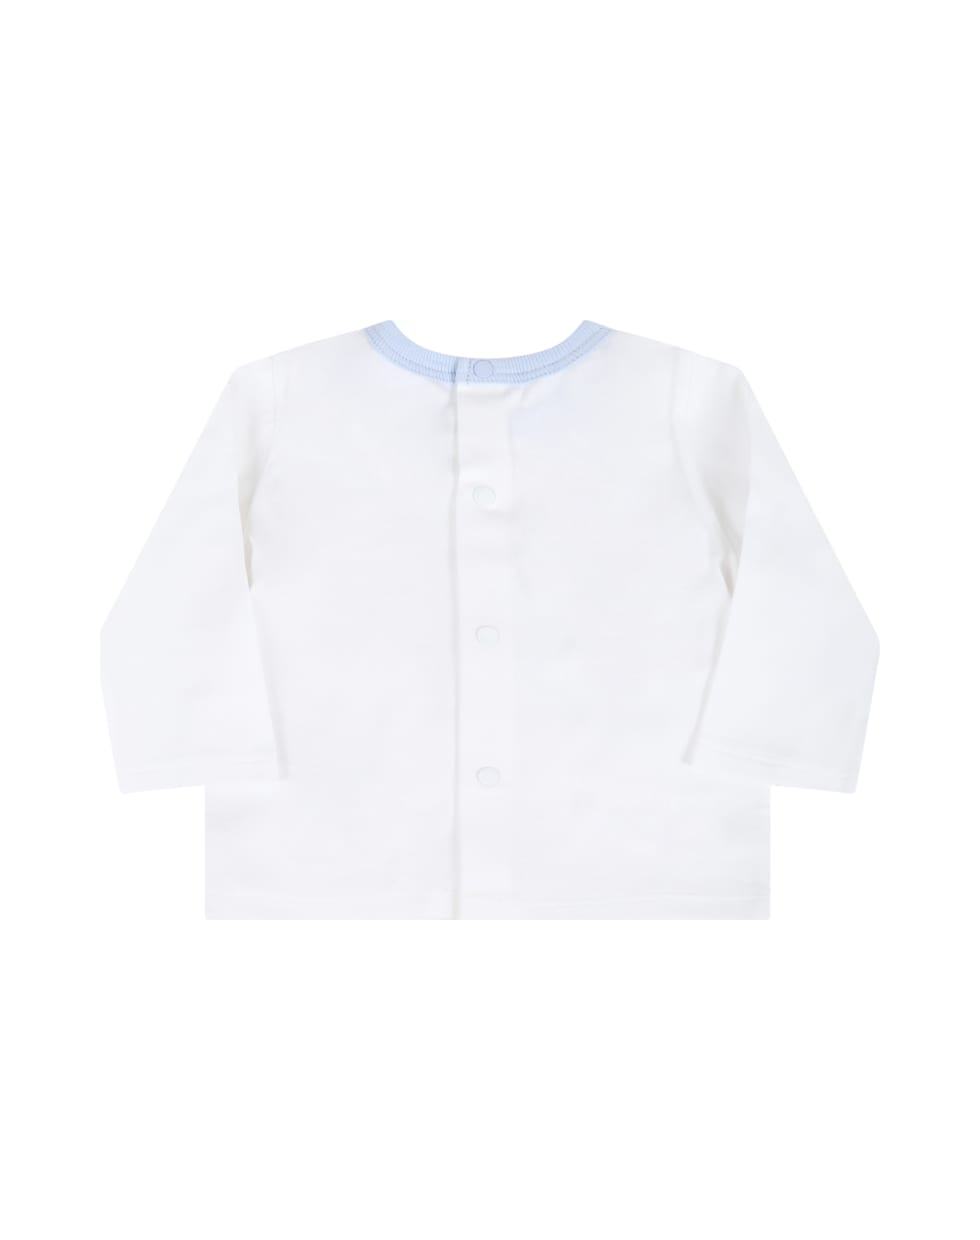 Givenchy Light Blue Tracksuit For Baby Boy - Blu